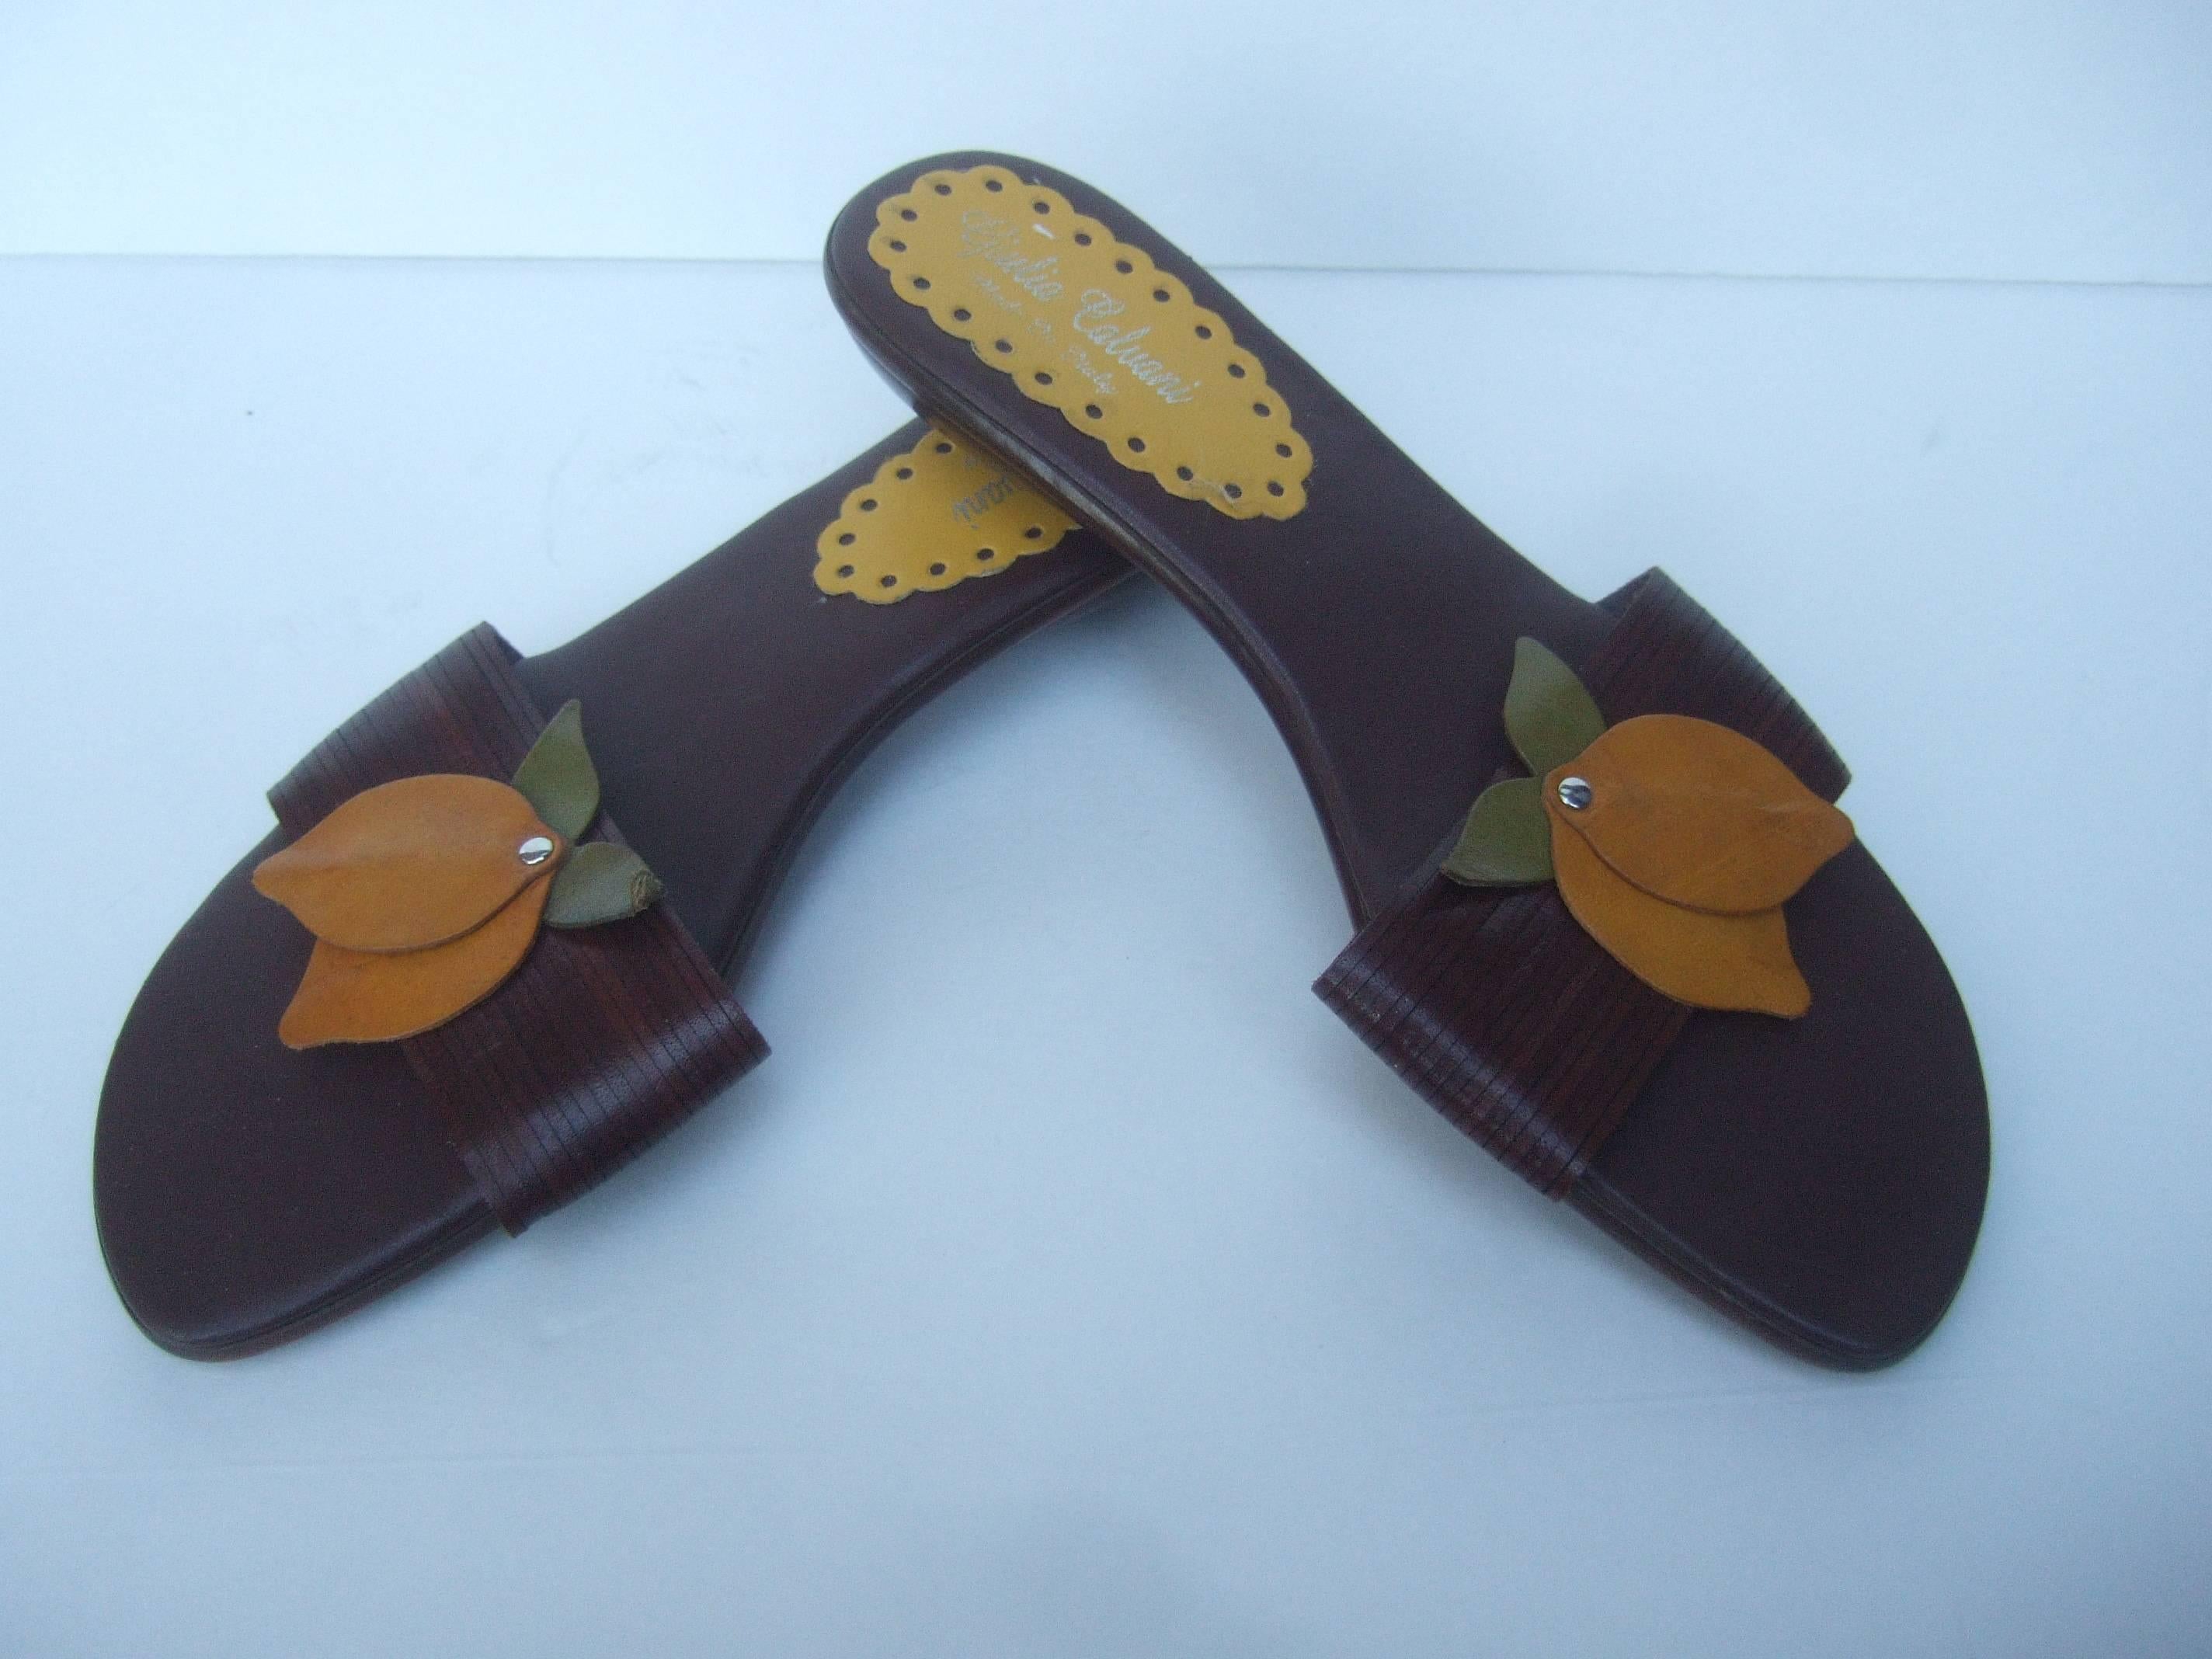 Stylish Italian leather applique lemon sandals 
The whimsical Italian sandals are designed
with a pair of applique leather lemons 
and leaves on the front 

The leather lemons are secured to a 
wide brown leather panel designed
with rows of